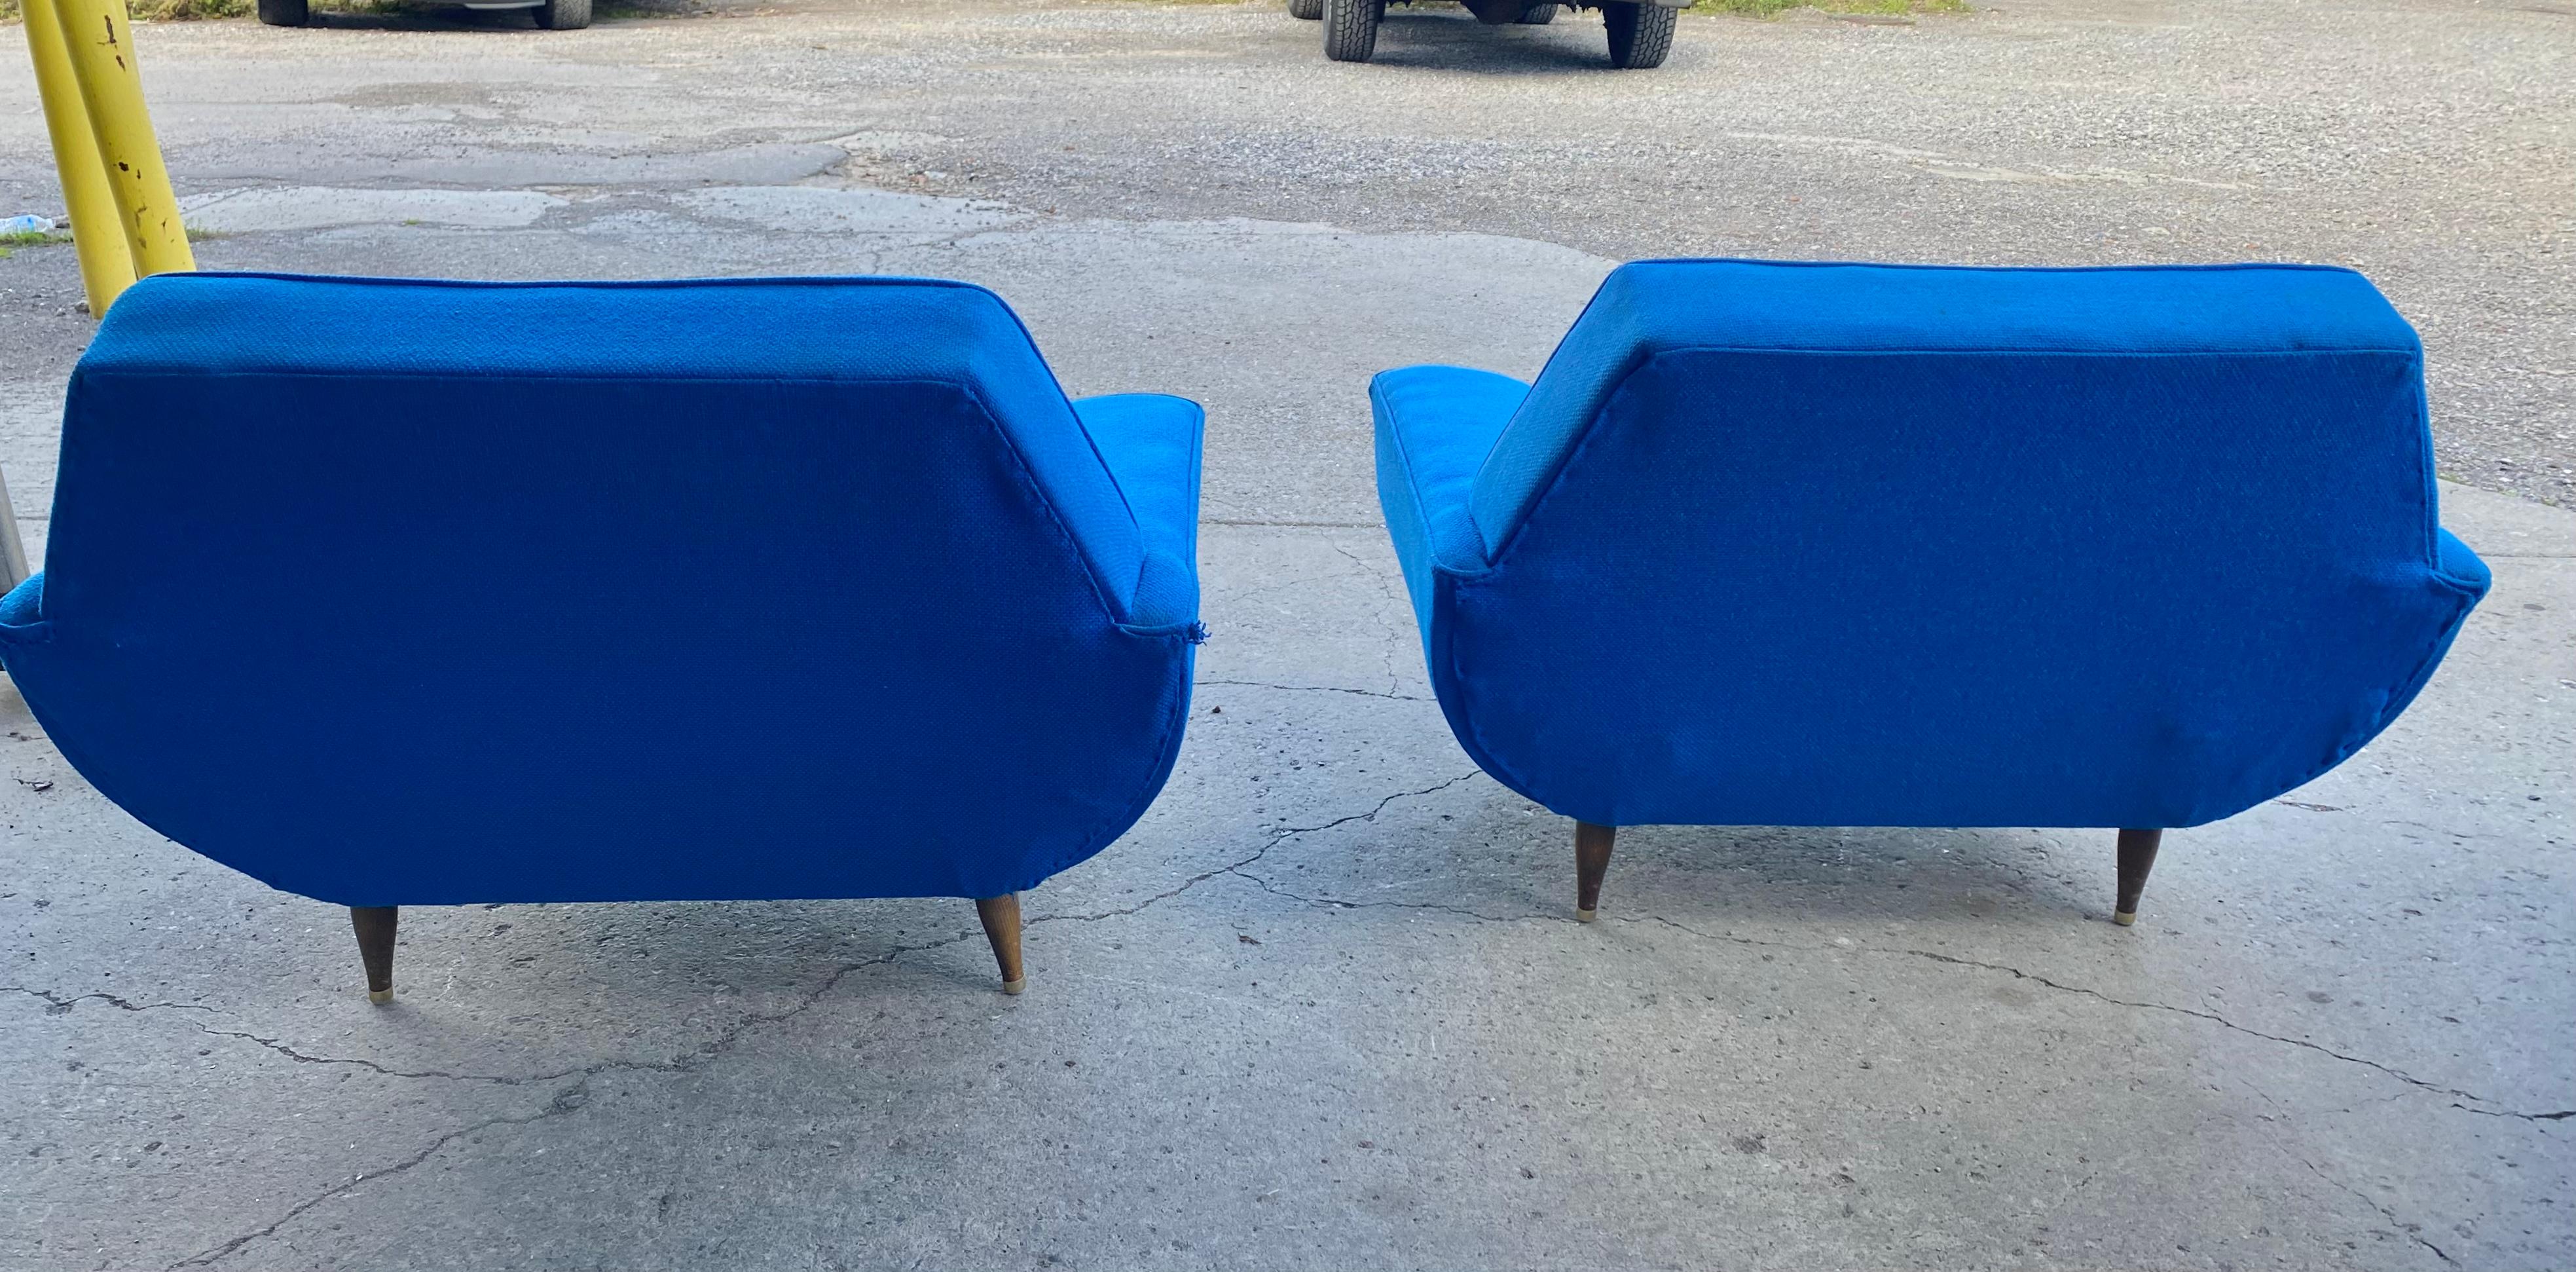 Stunning Mid-Century Modern sofa and pair matching chairs, Retains period Electric blue wool upholstery, Button and tuxedo tufted, chairs measure 41